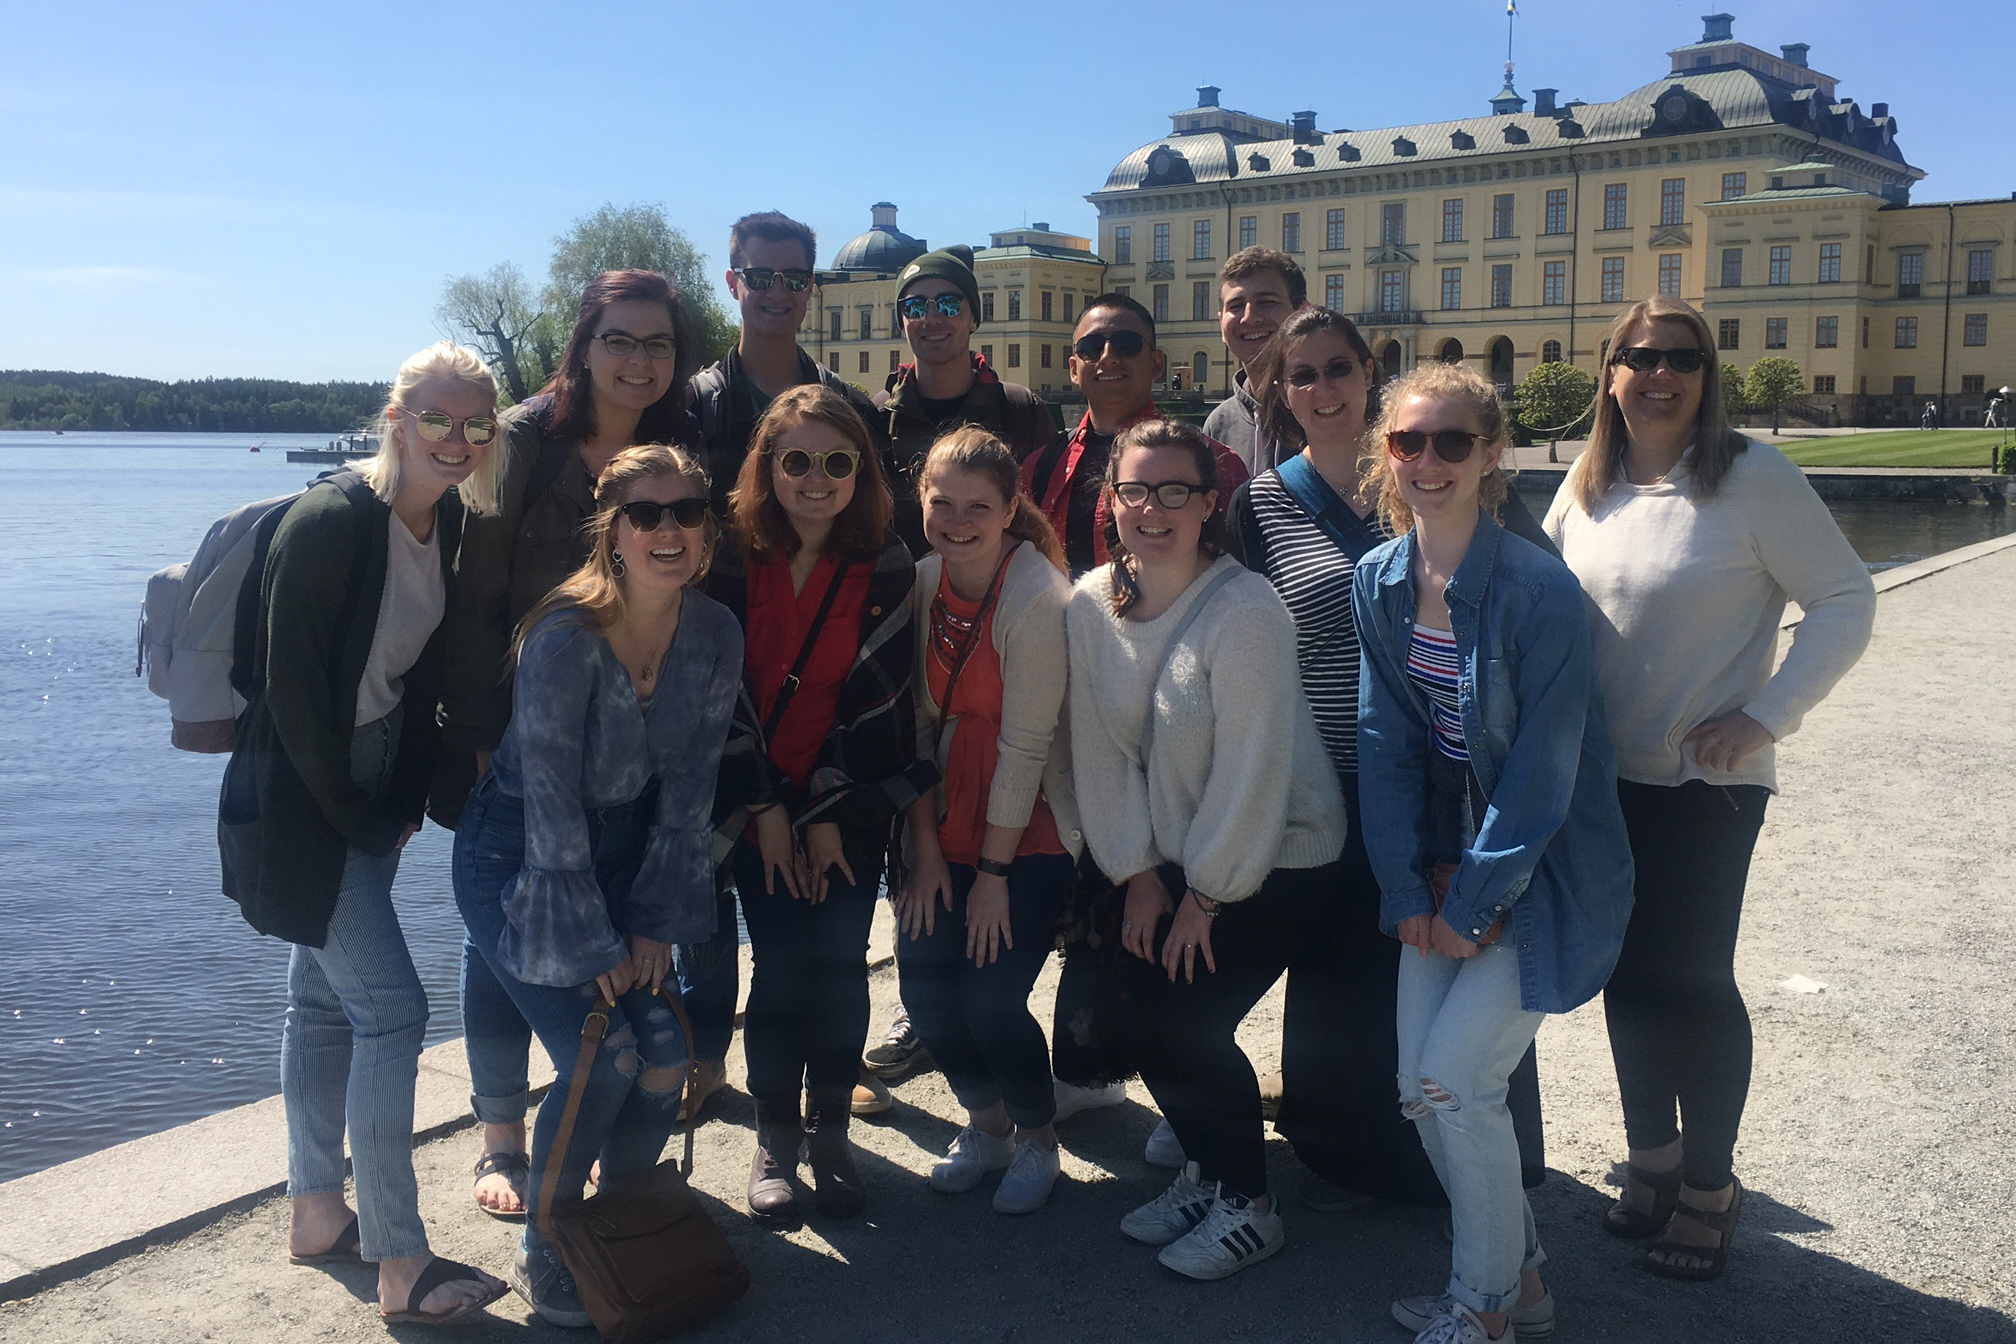 Widner (far right) and the students enjoyed a boat ride to Drottningholm Palace.